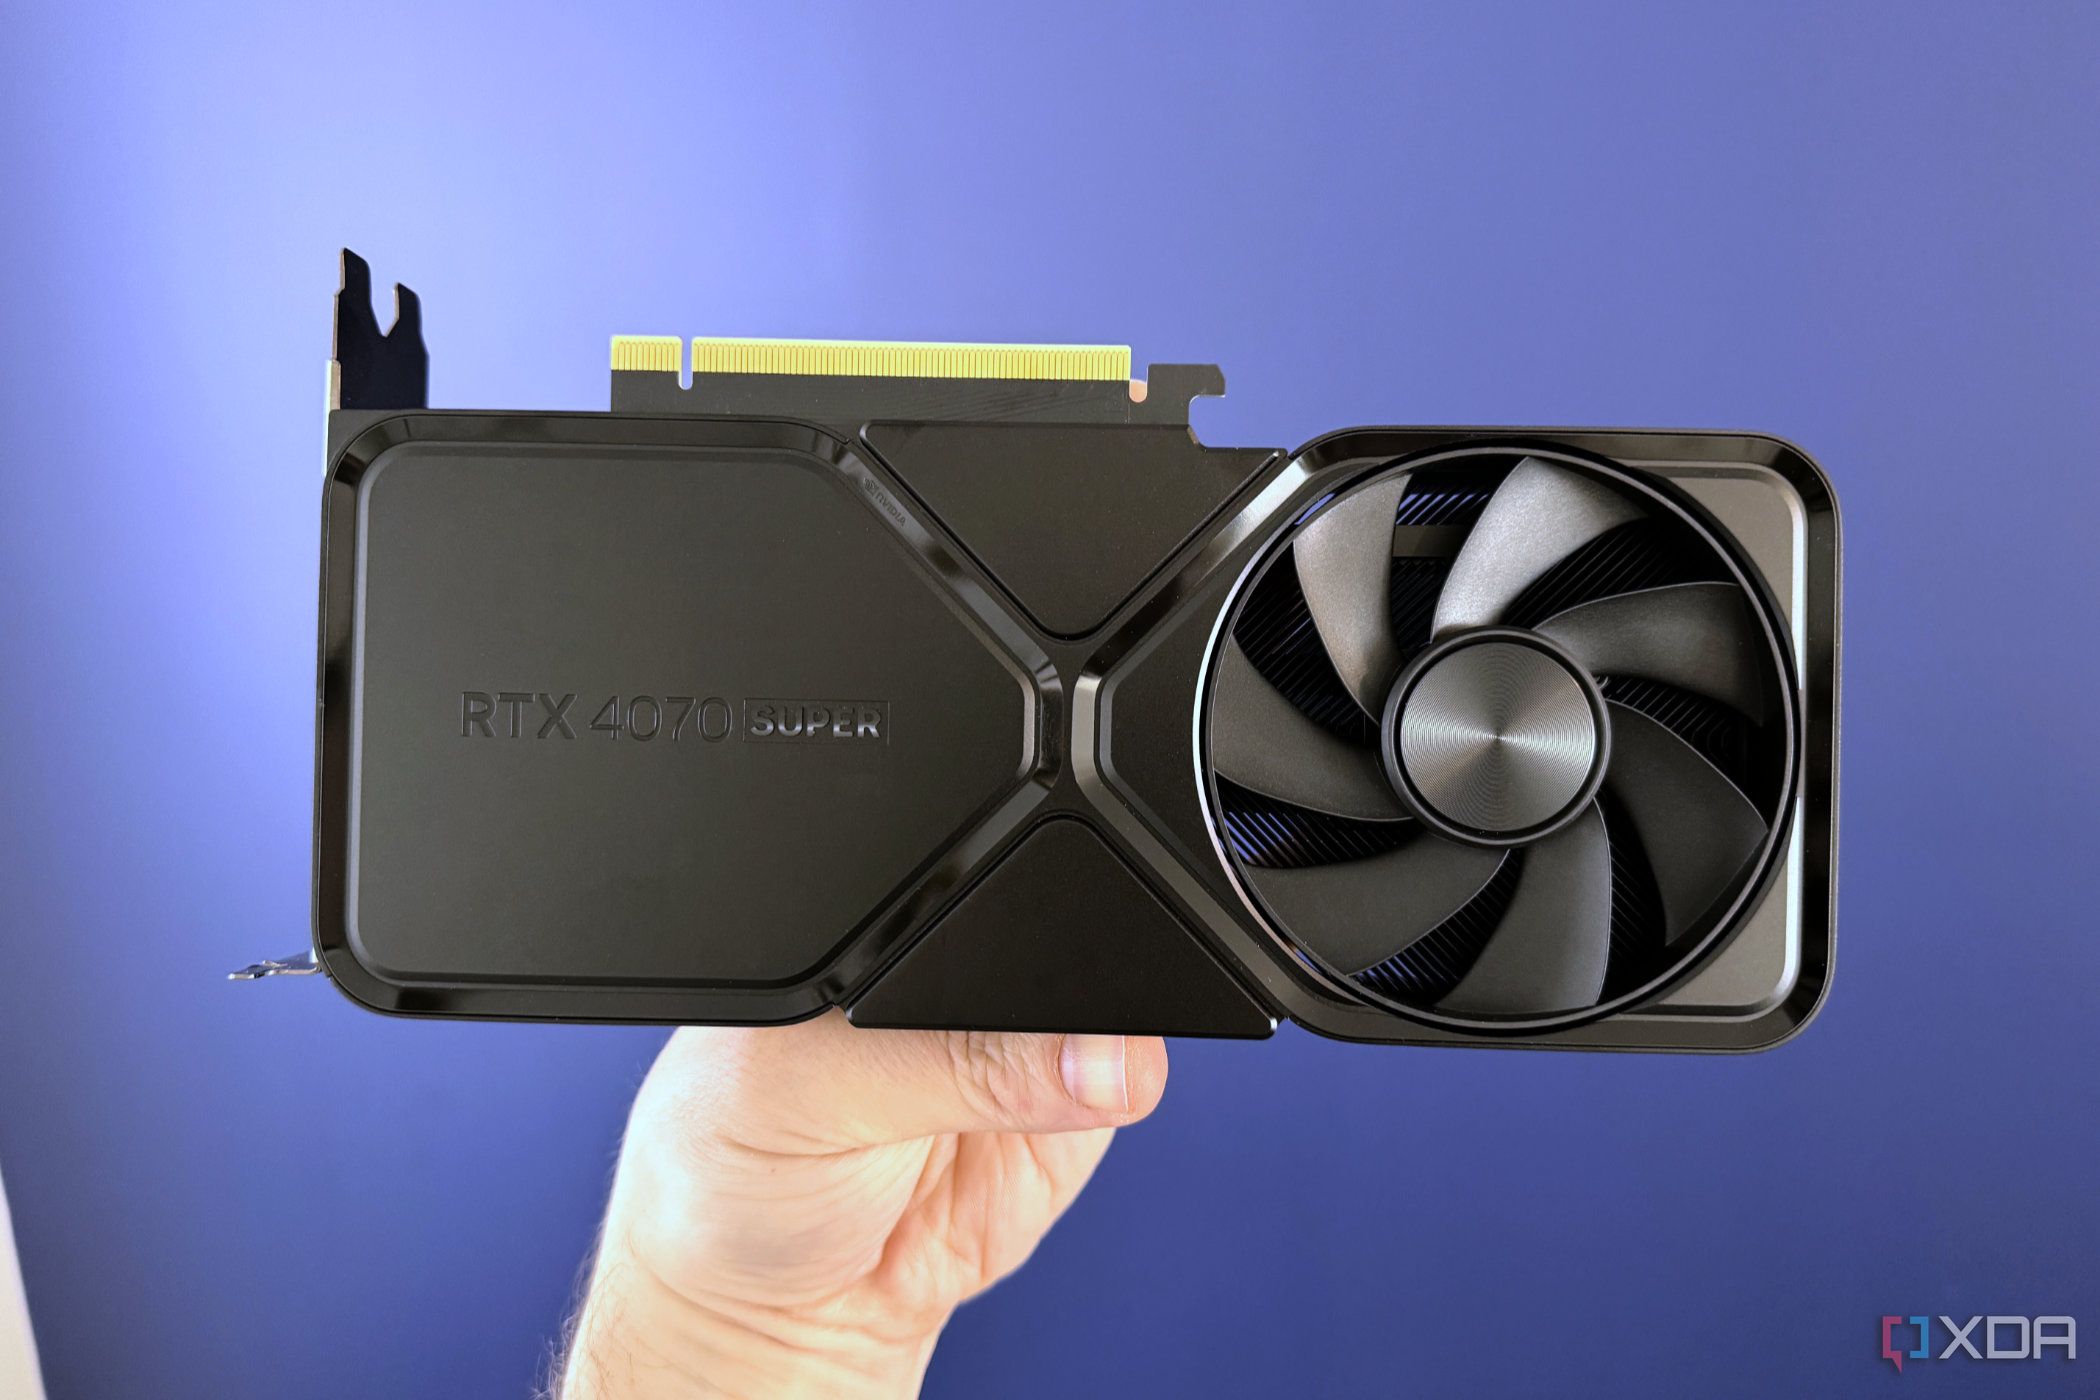 nvidia geforce rtx 4070 super founders edition held in front of blue wall